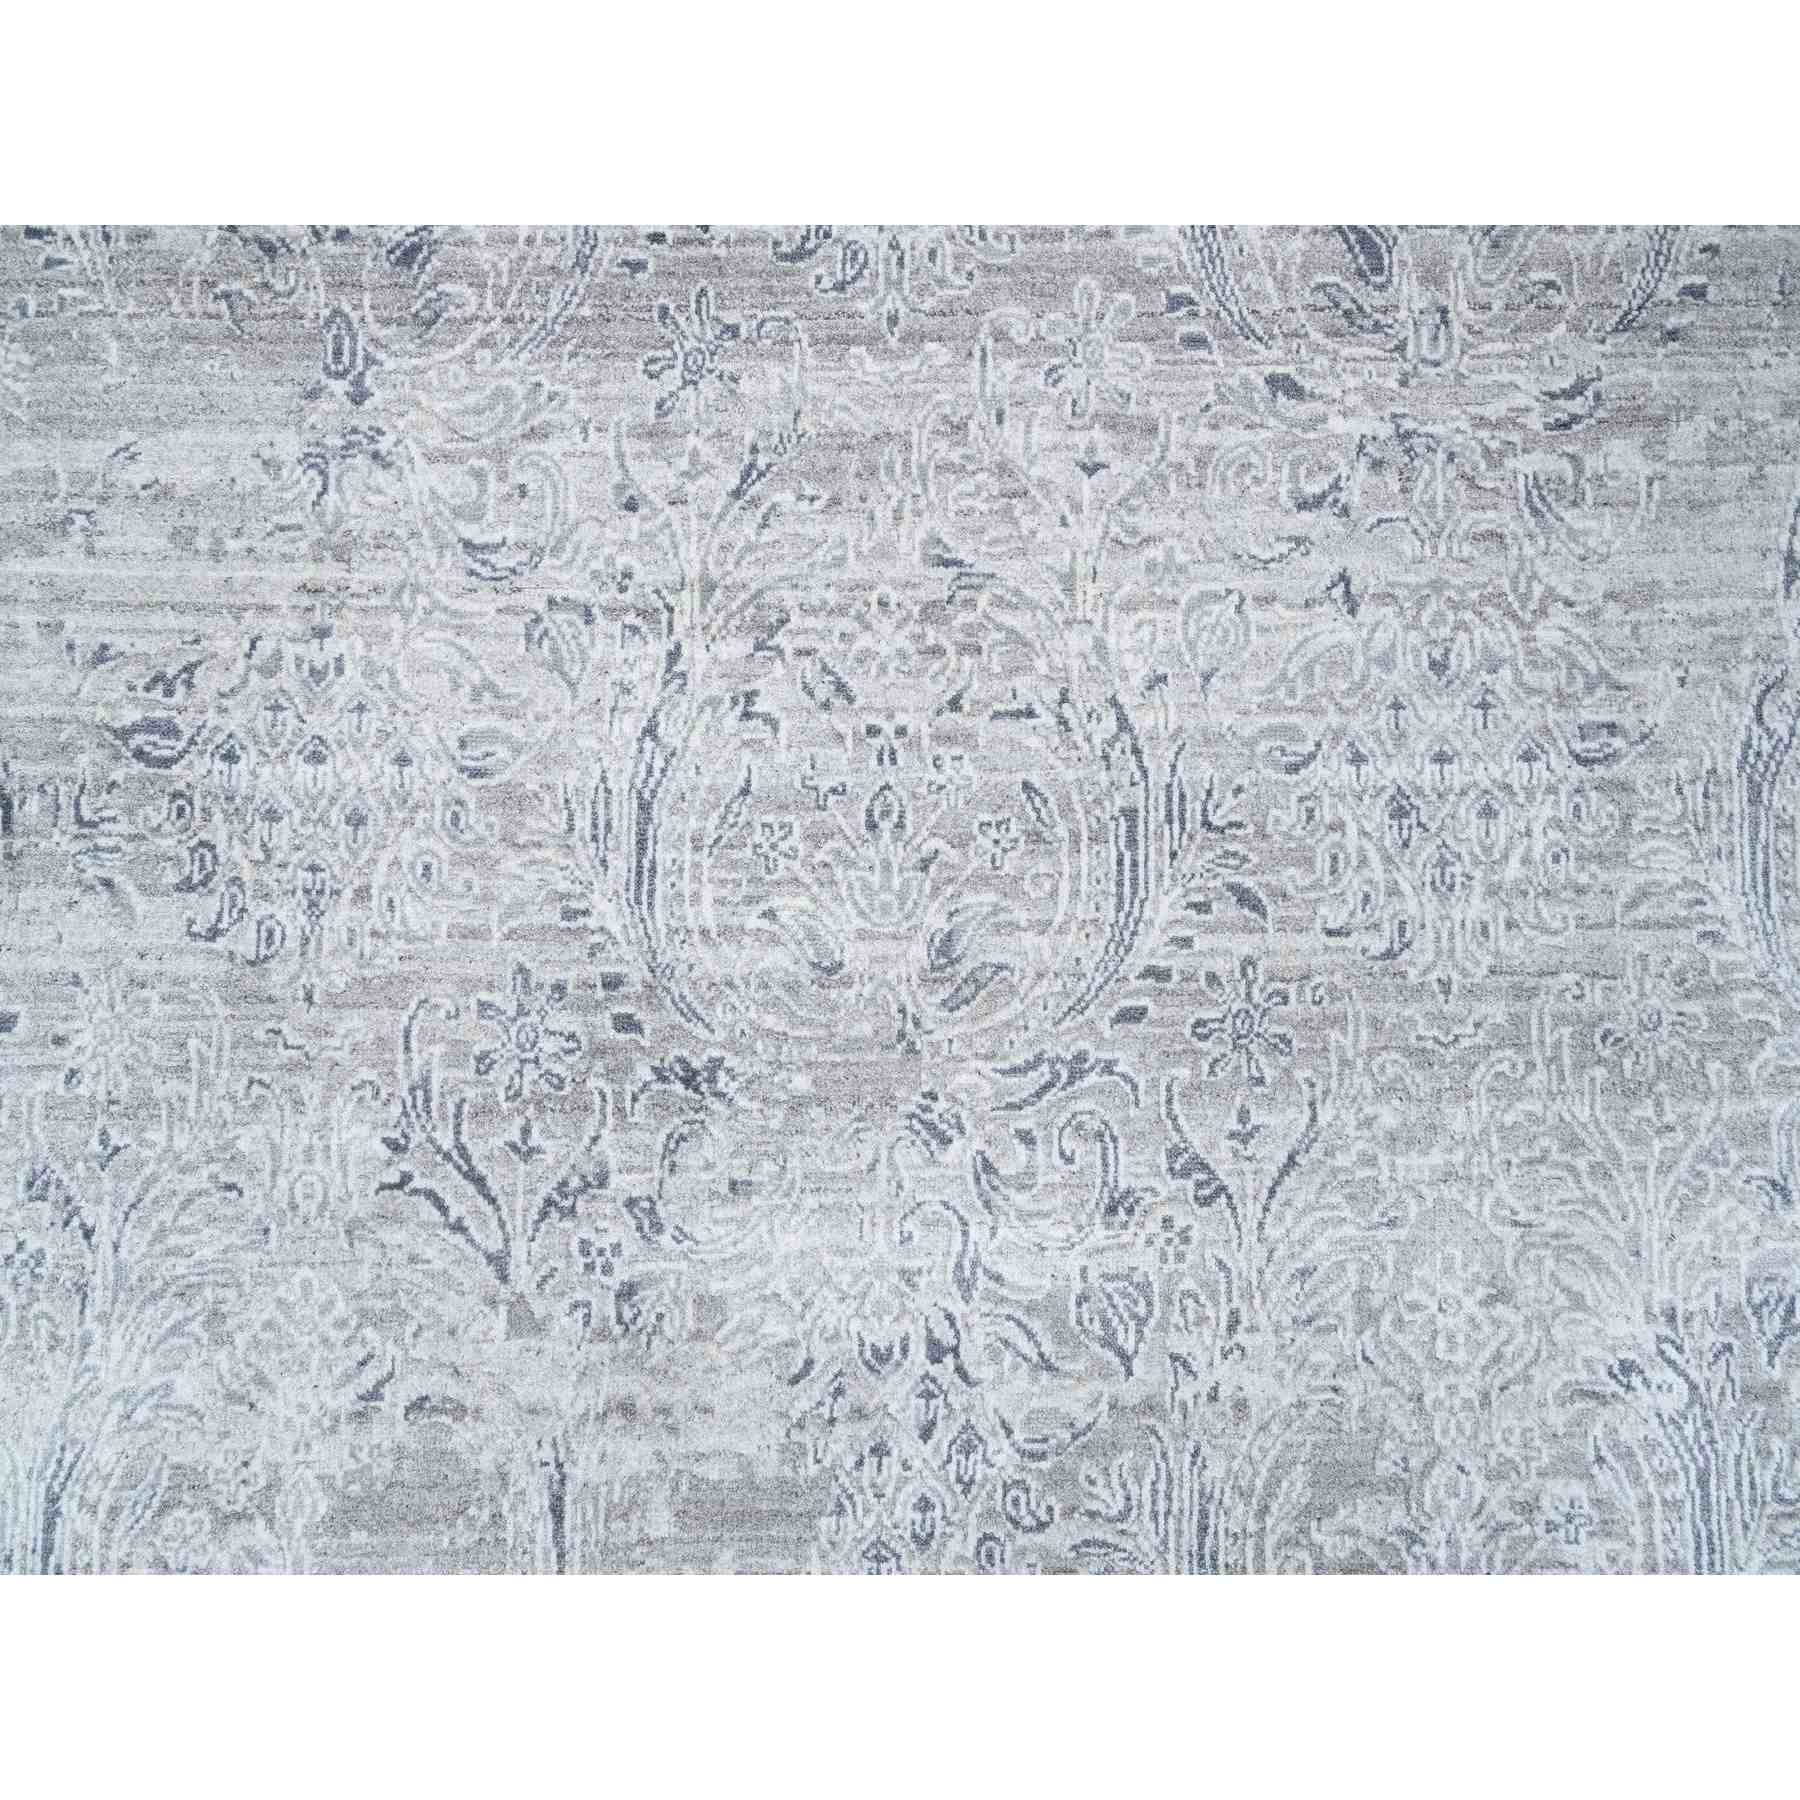 Transitional-Hand-Knotted-Rug-325210